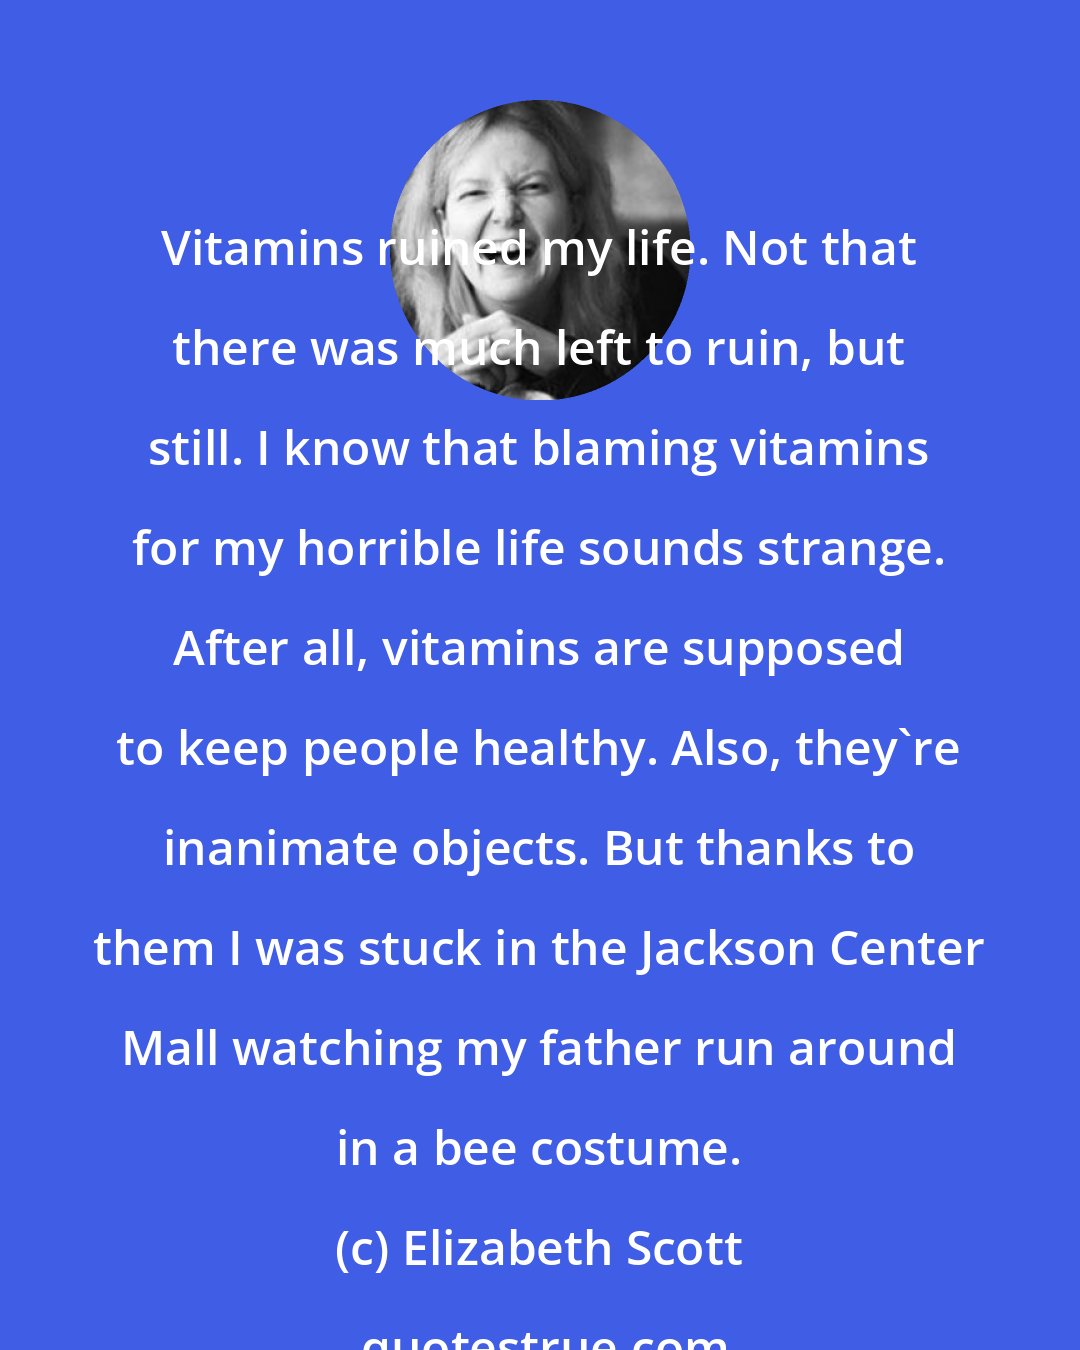 Elizabeth Scott: Vitamins ruined my life. Not that there was much left to ruin, but still. I know that blaming vitamins for my horrible life sounds strange. After all, vitamins are supposed to keep people healthy. Also, they're inanimate objects. But thanks to them I was stuck in the Jackson Center Mall watching my father run around in a bee costume.